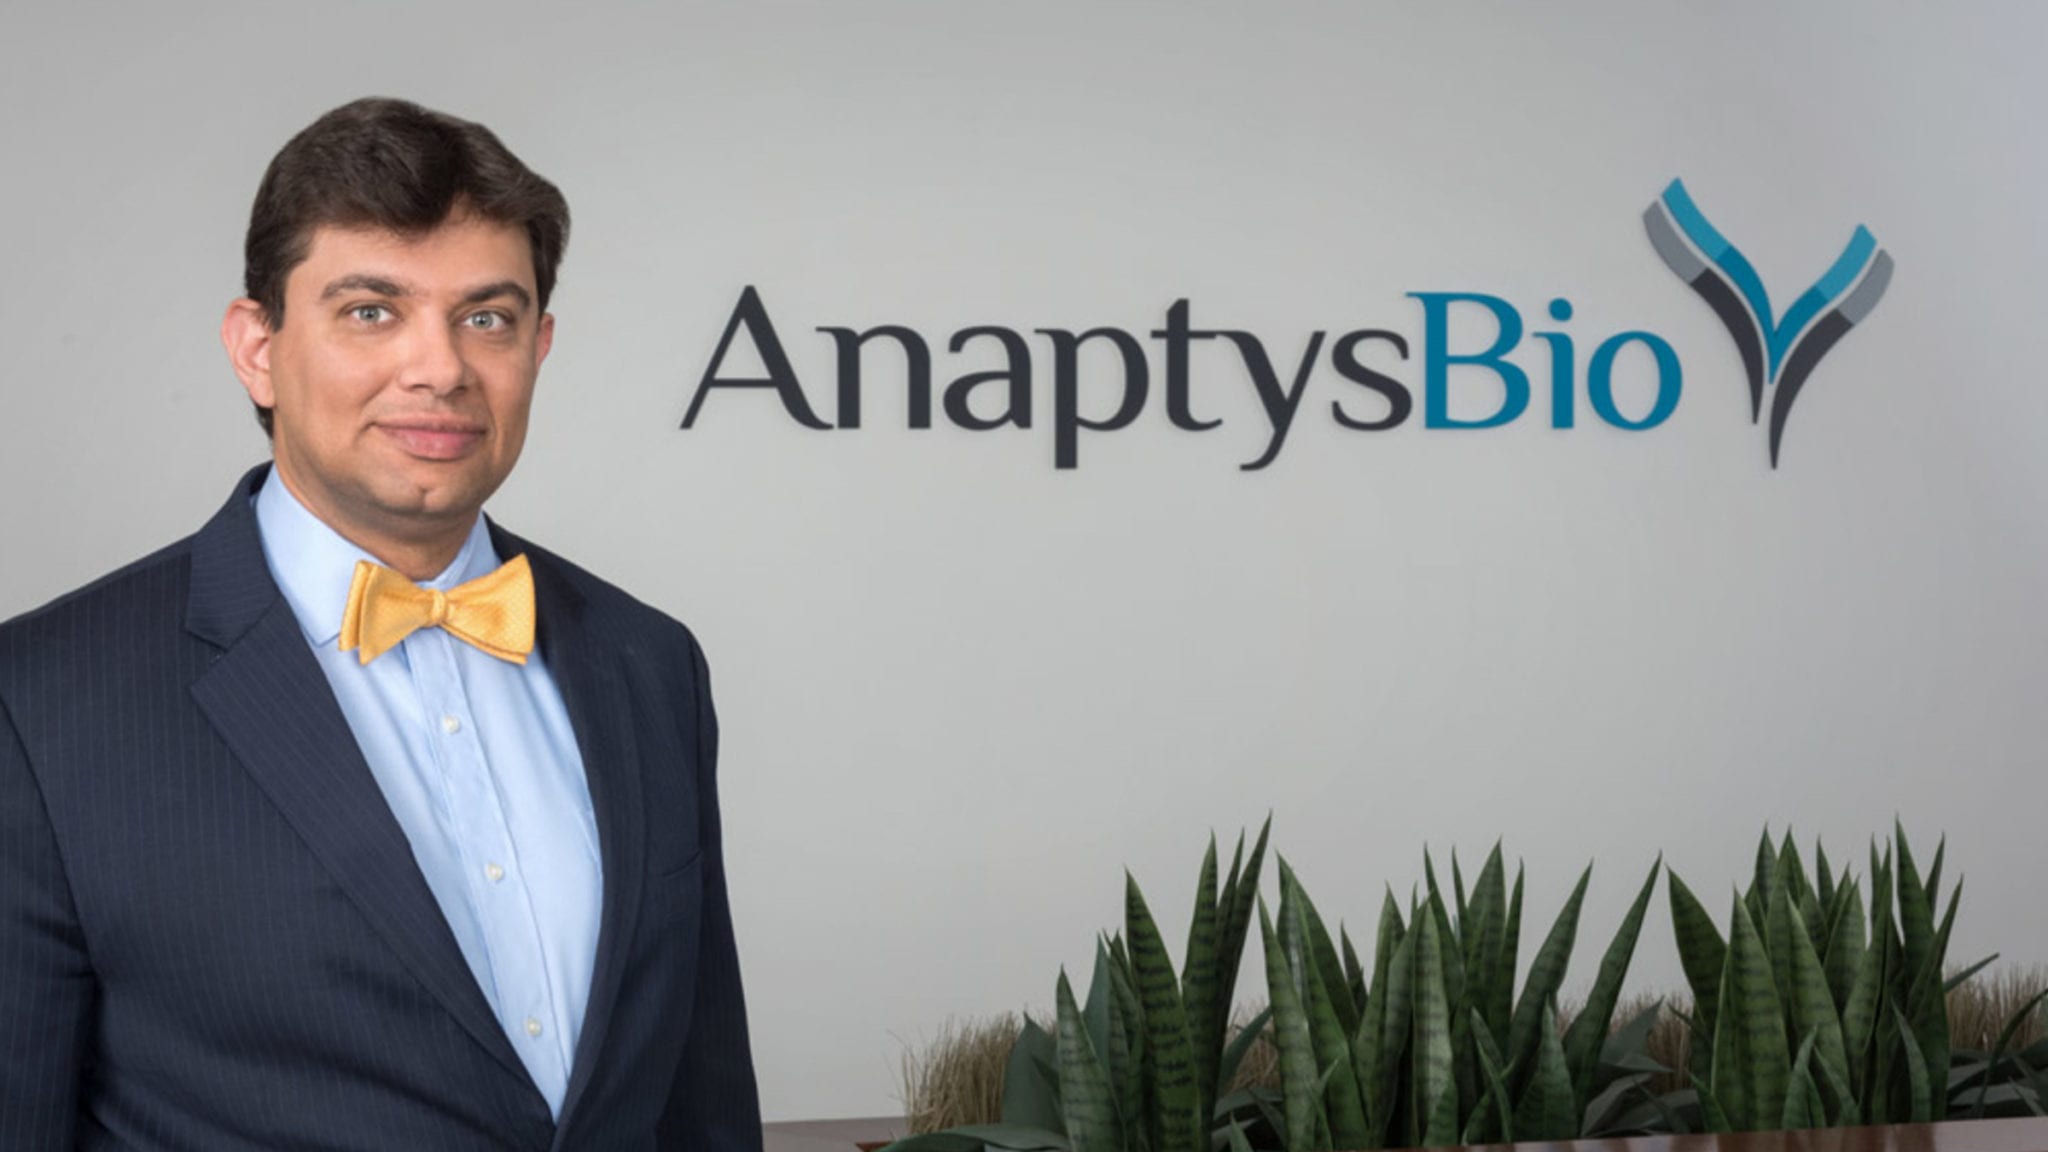 AnaptysBio CEO abruptly resigns less than a week after mid-stage flop